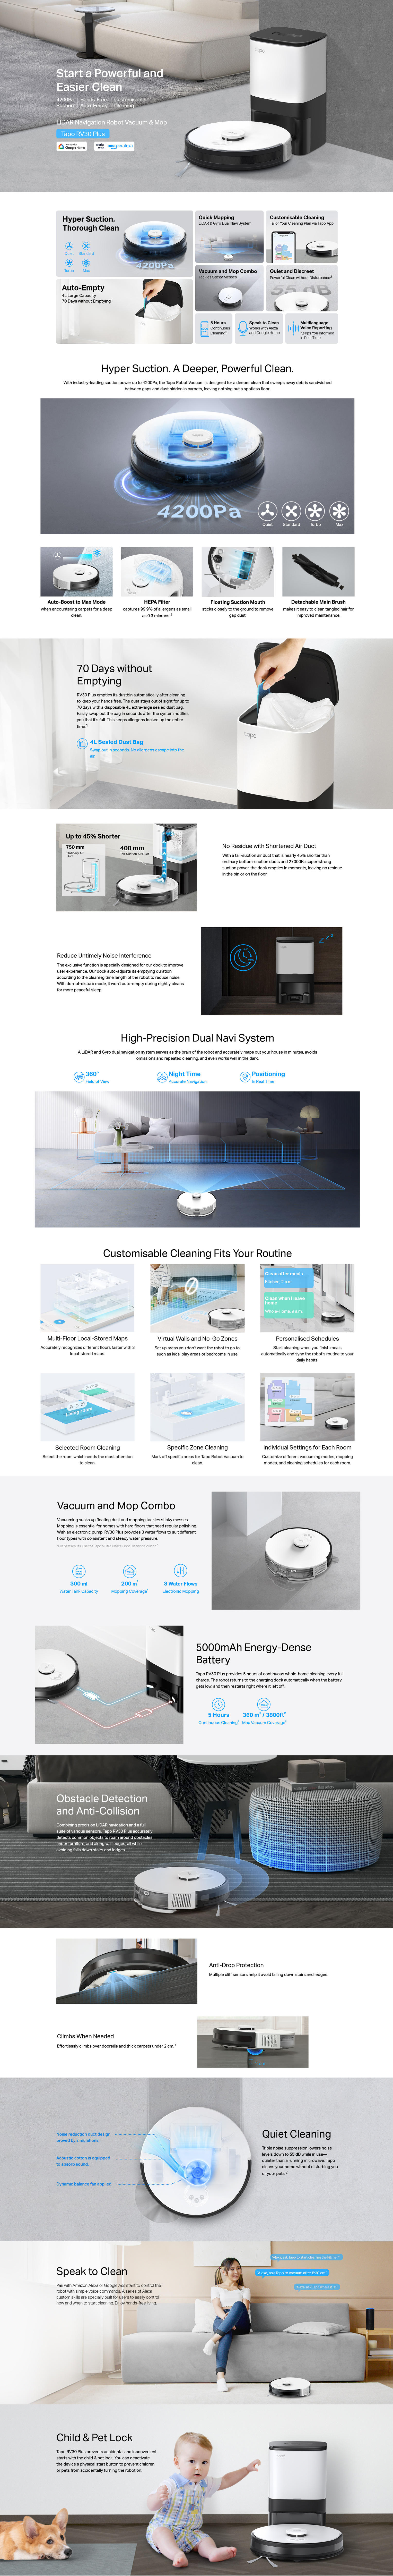 A large marketing image providing additional information about the product Tapo RV30 Plus - LiDAR Navigation Robot Vacuum & Mop w/ Smart Auto-Empty Dock - Additional alt info not provided